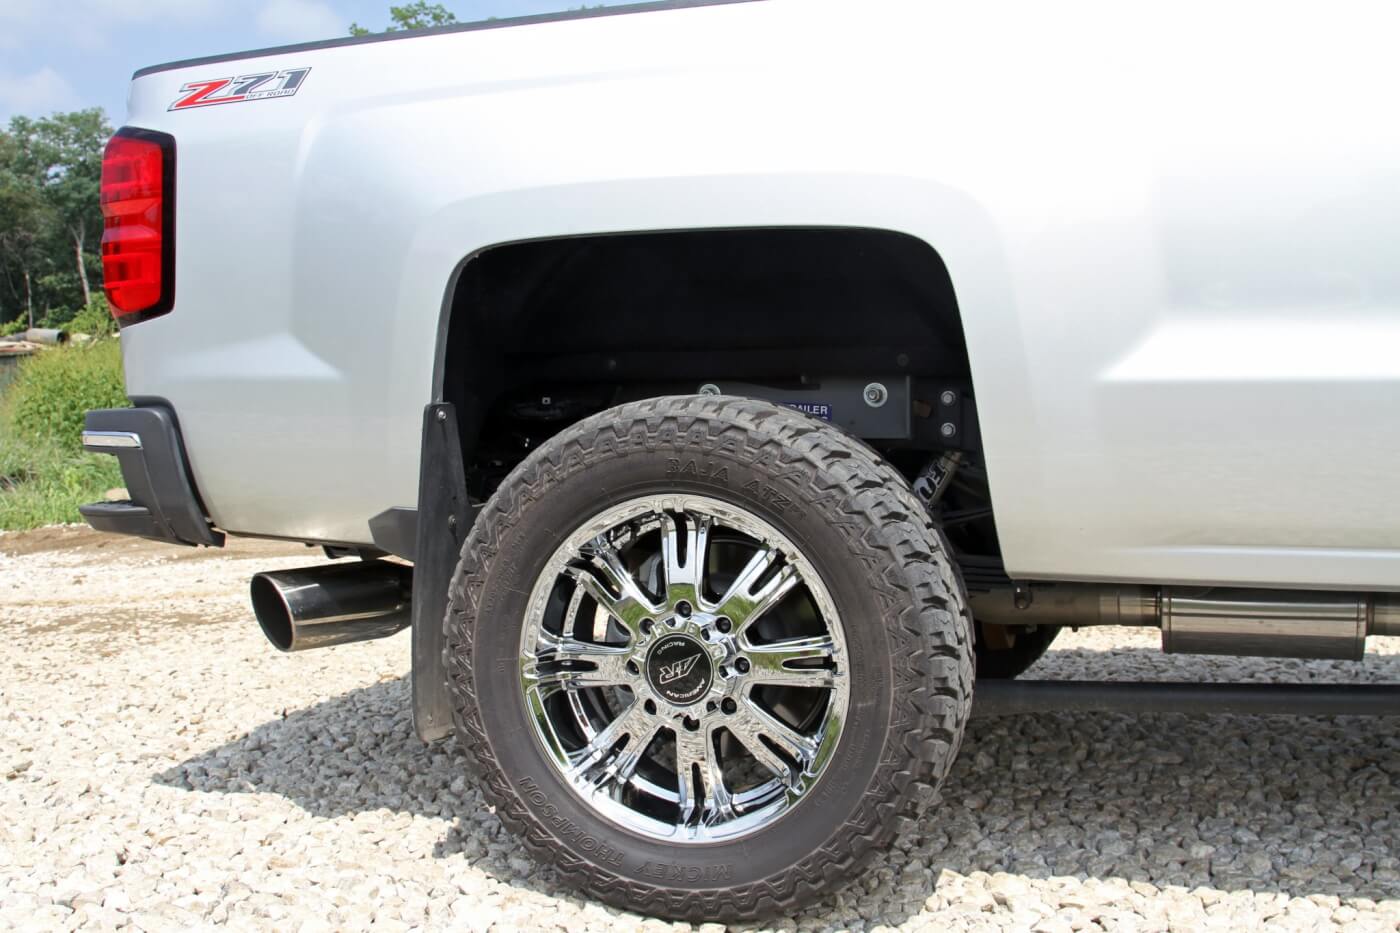 Randall ditched the factory rims for a set of 20x9 American Racing AR708 wheels. LT305/55R20 Mickey Thompson Baja ATZ P3 tires provide good grip on and off the pavement.